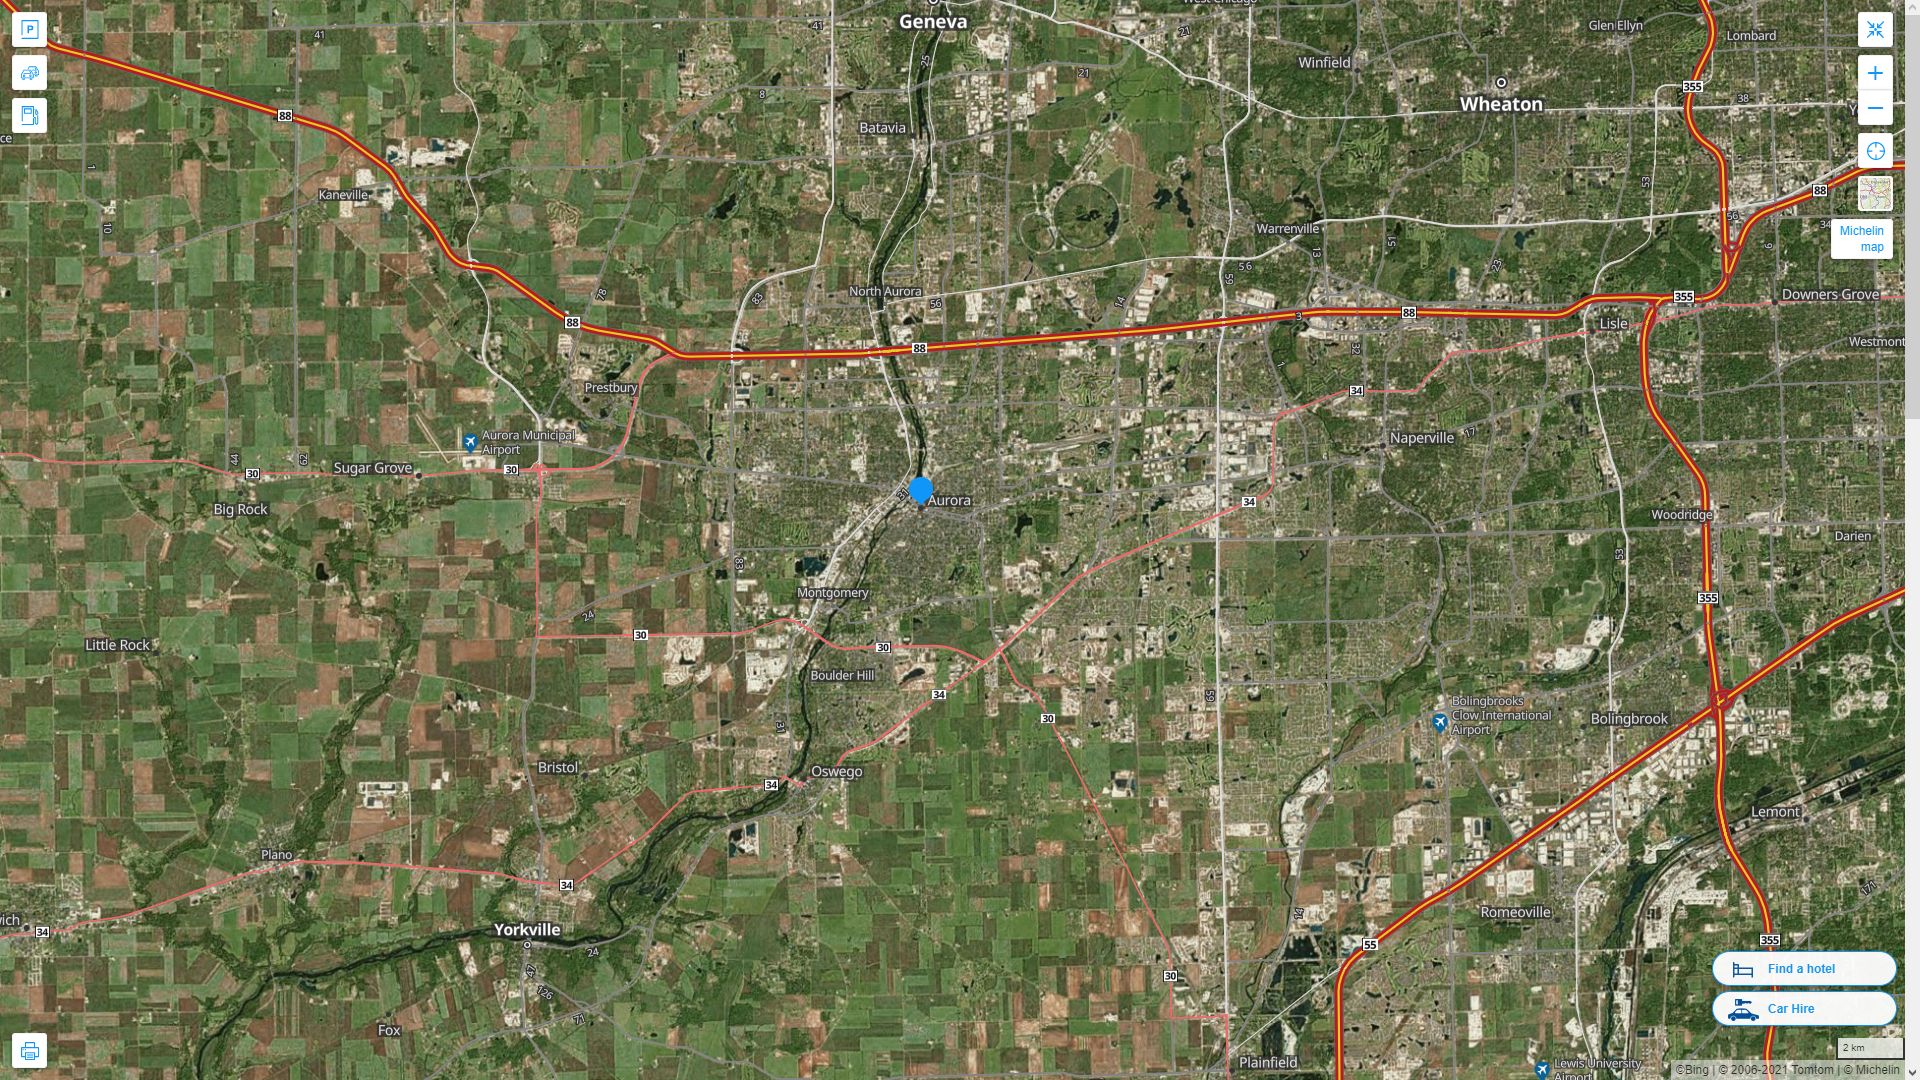 Aurora illinois Highway and Road Map with Satellite View